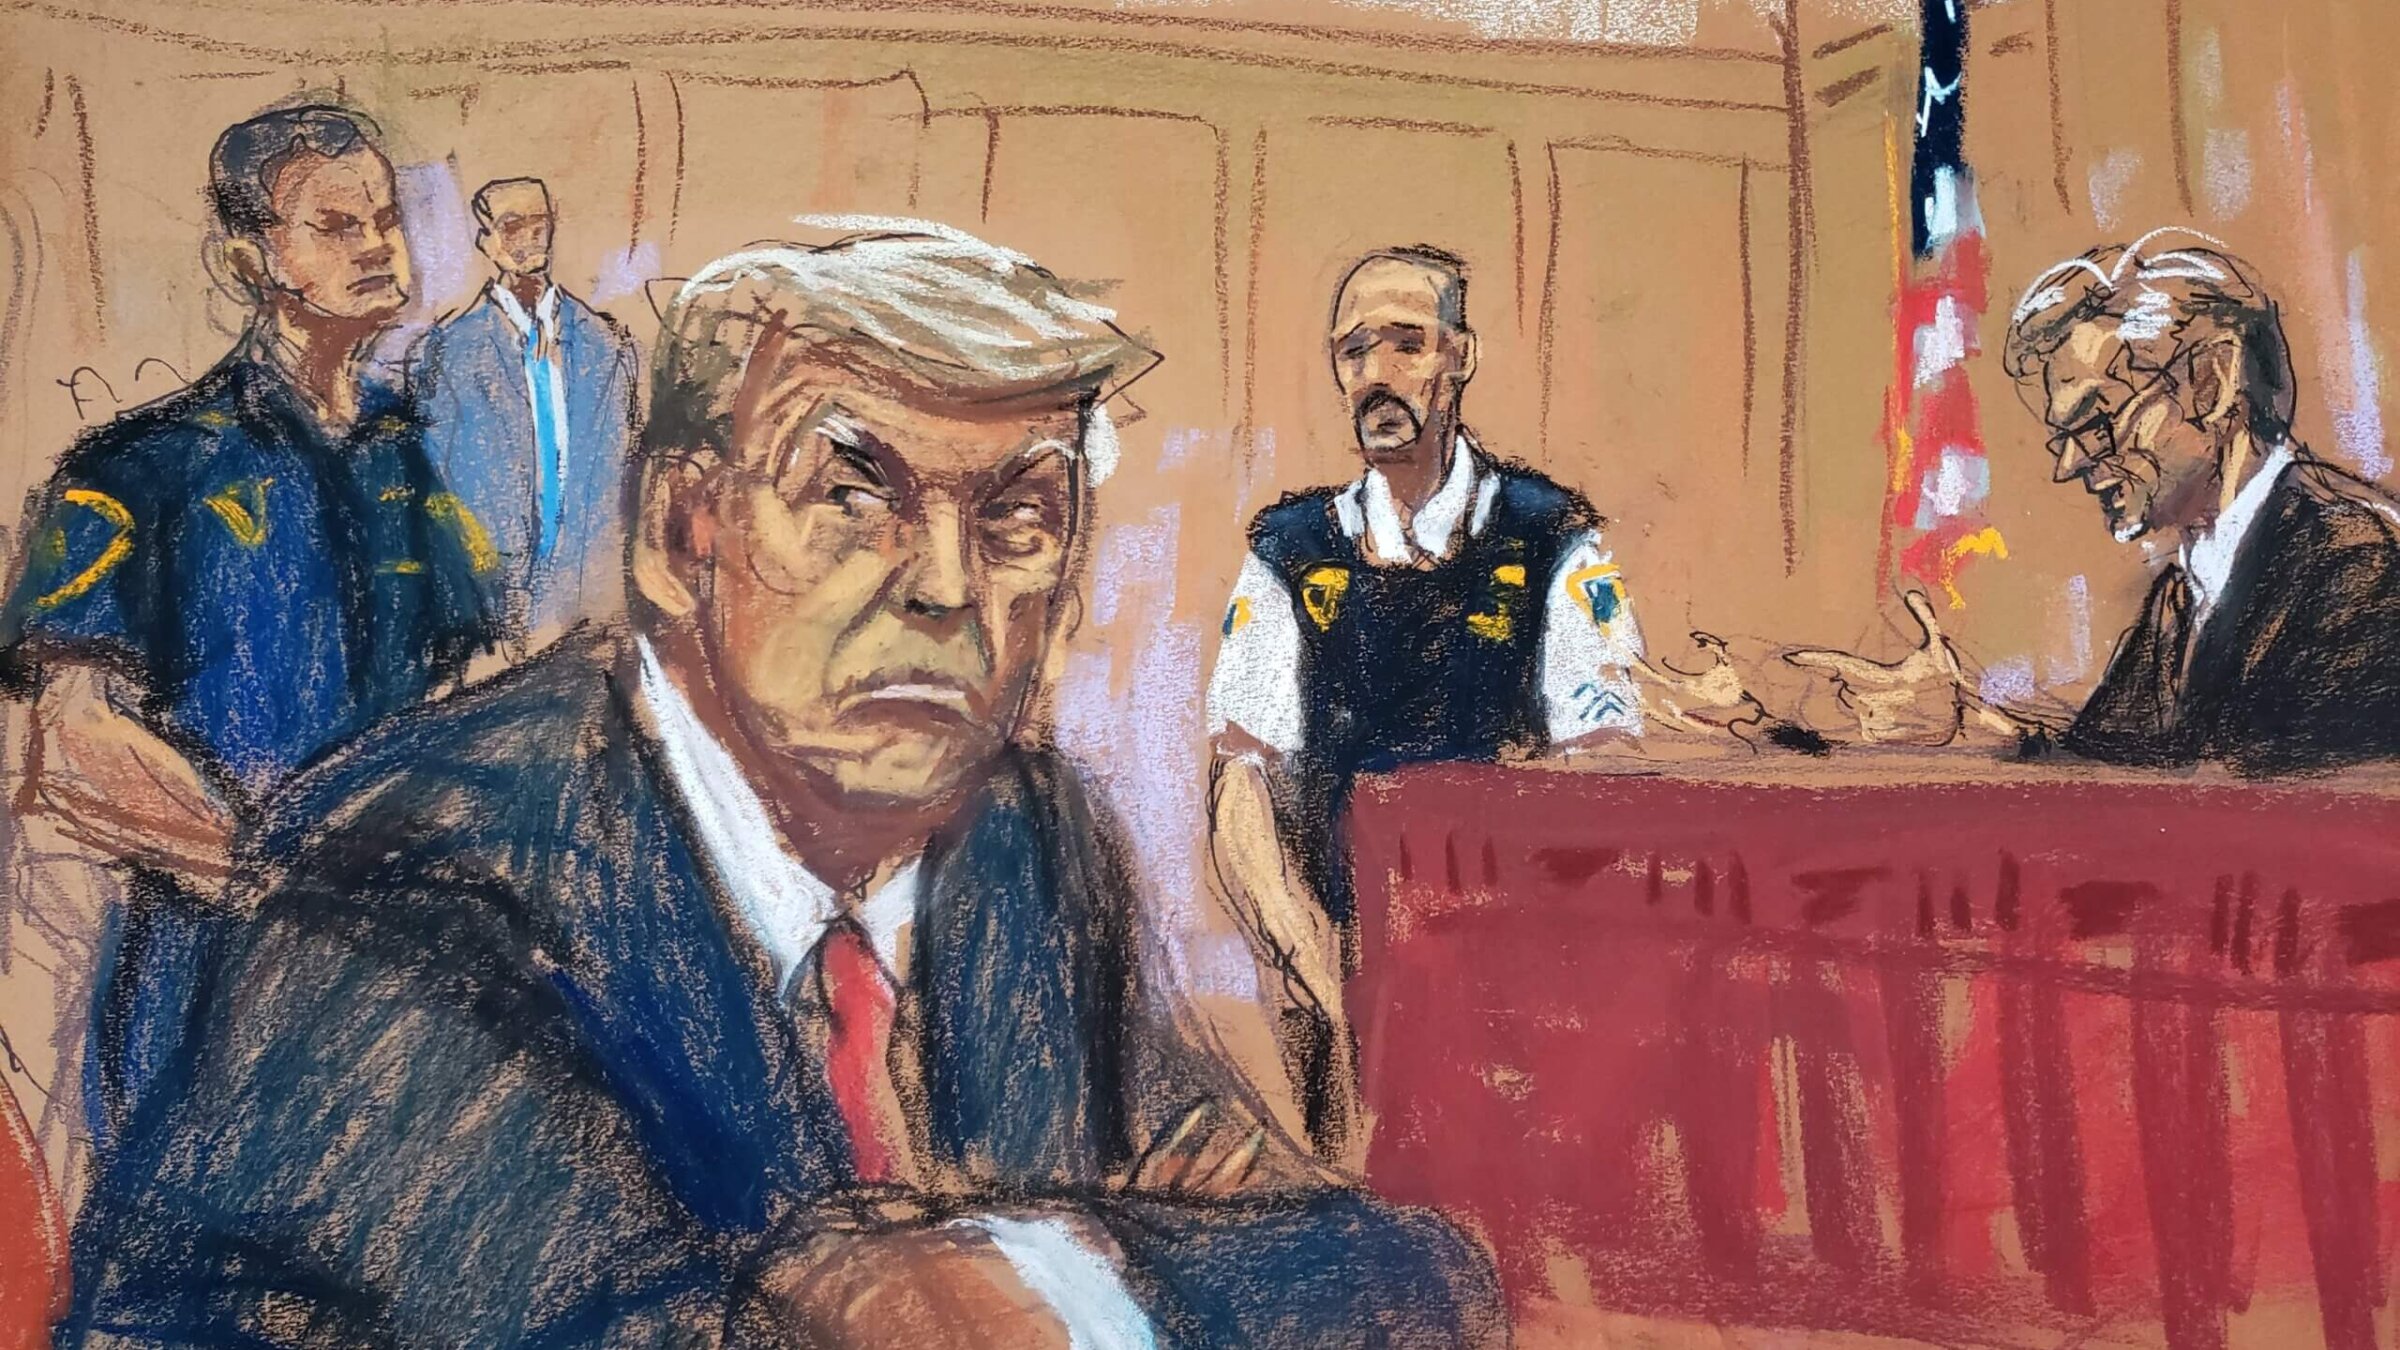 A courtroom artist #39 s Trump sketch is the latest New Yorker cover The